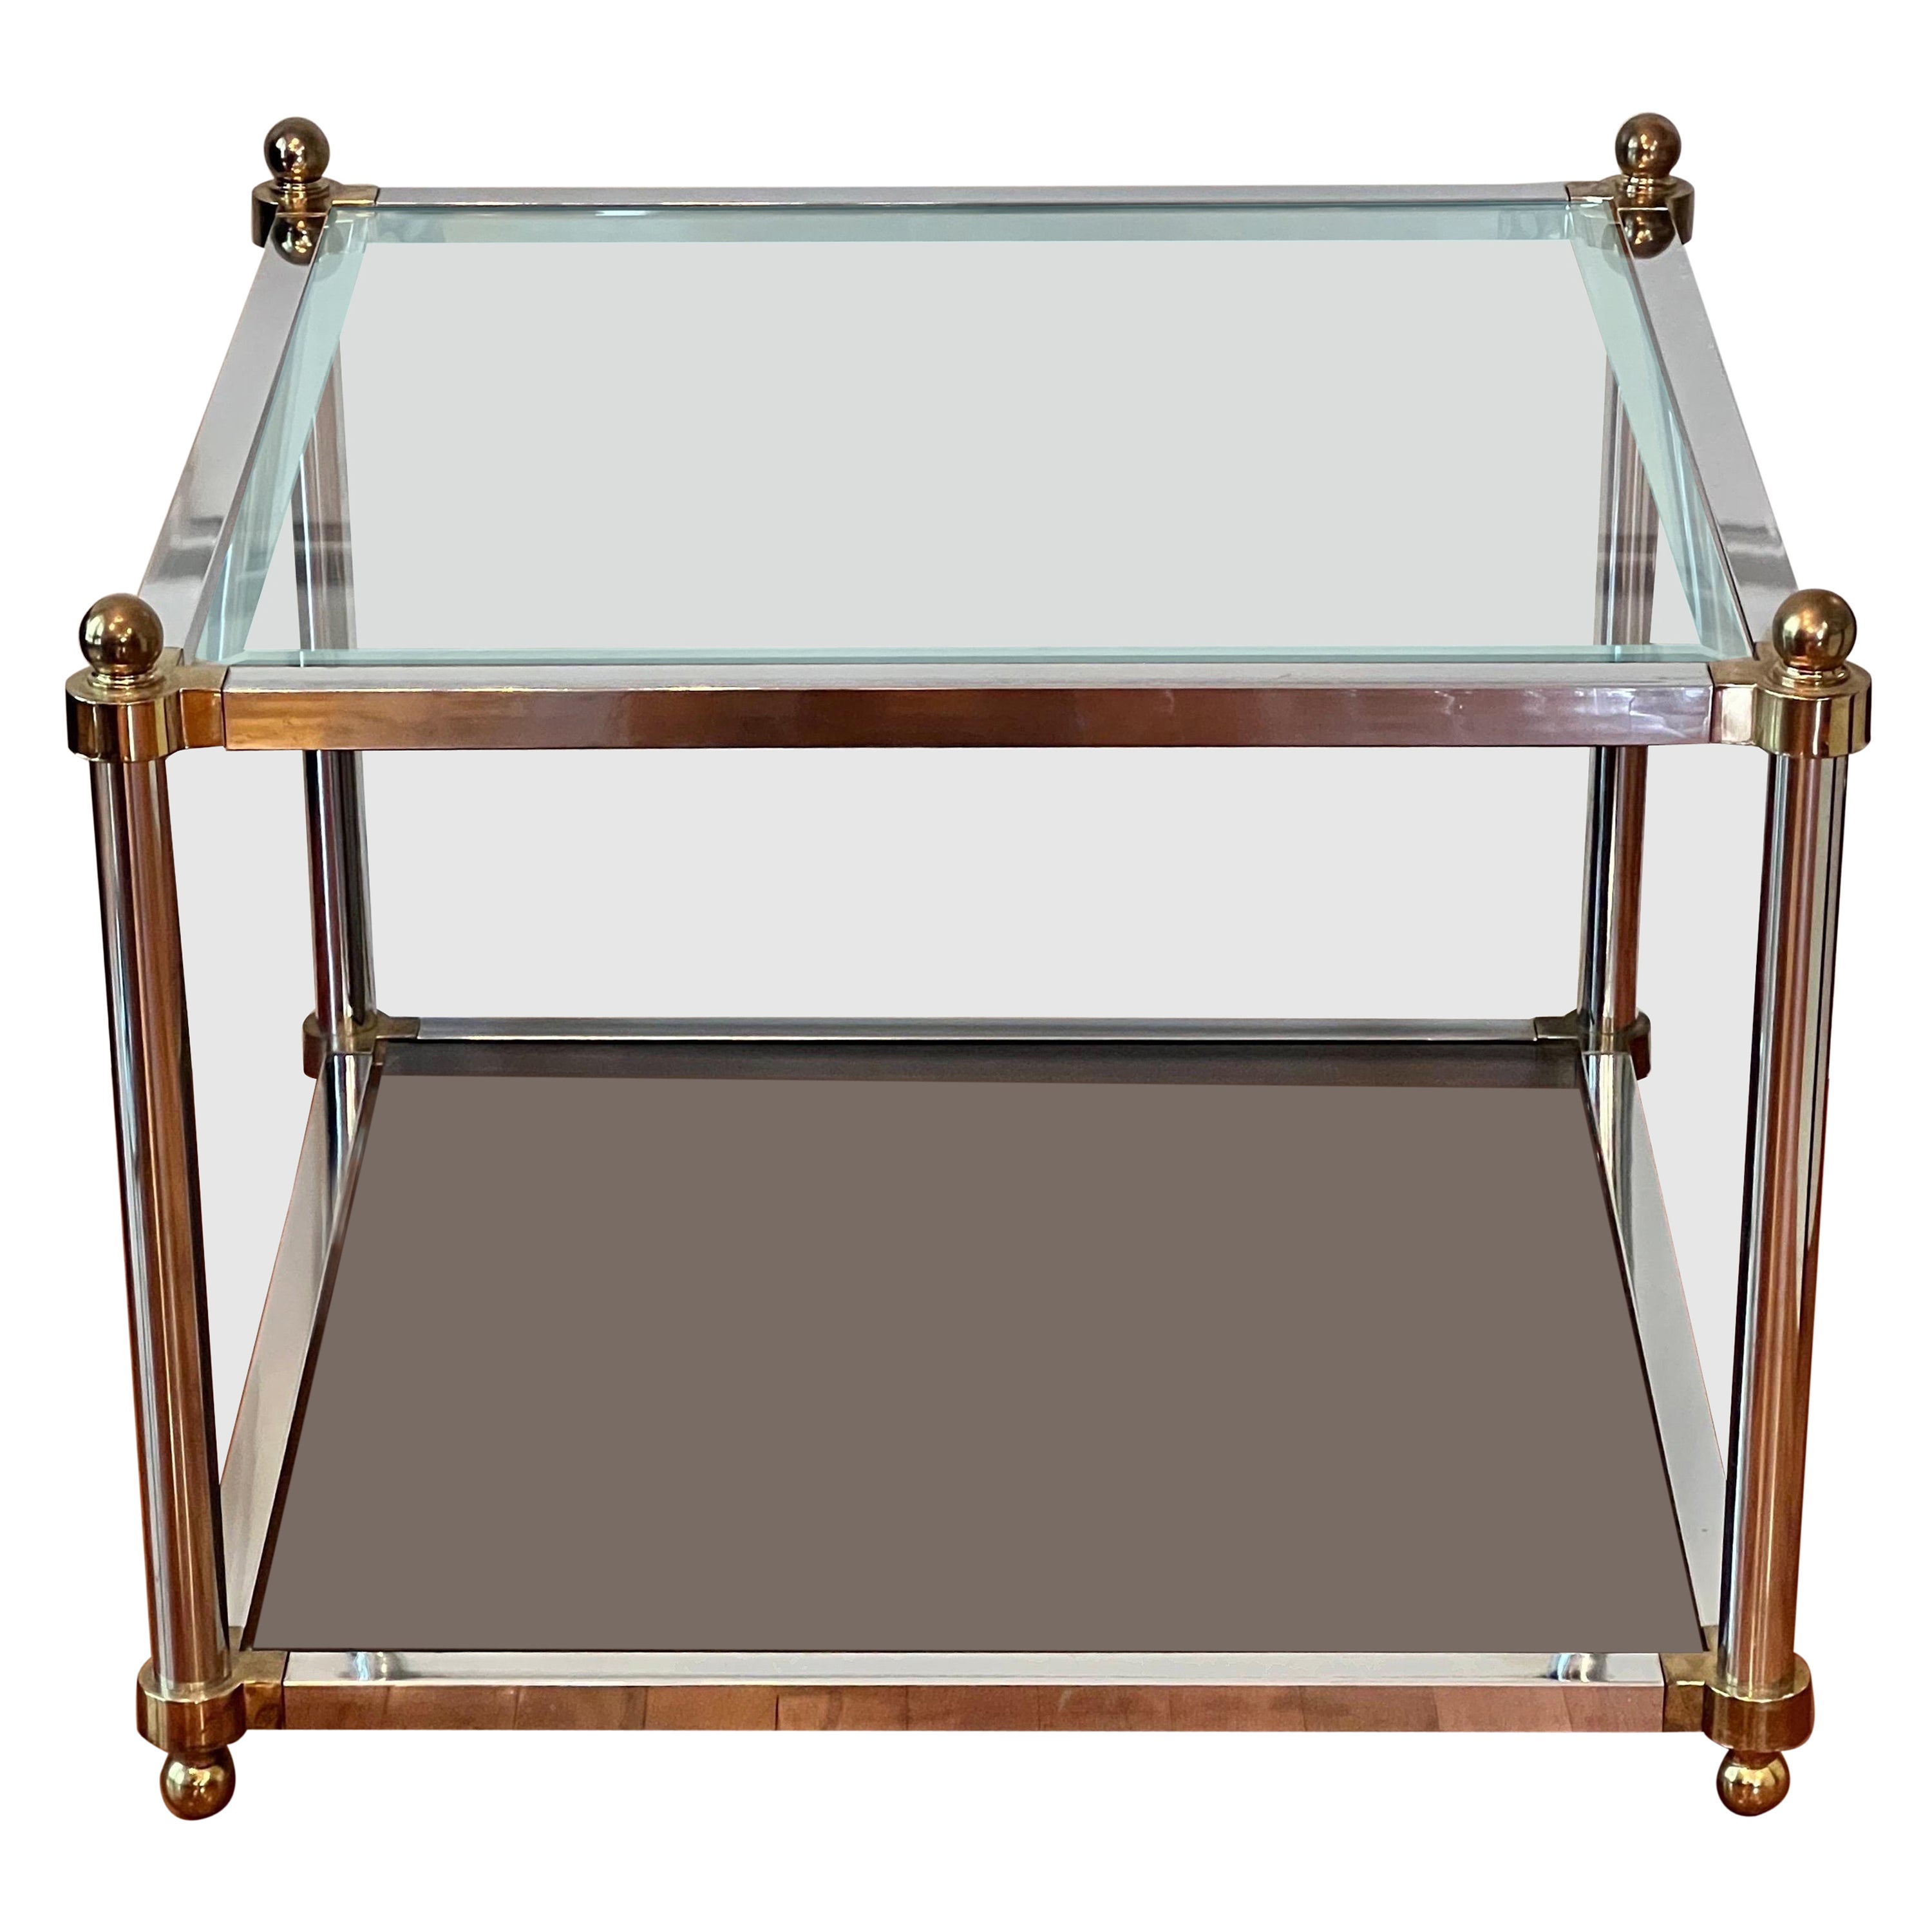 Midcentury Maison Jansen Style Brass and Polished Steel Square Cocktail Table